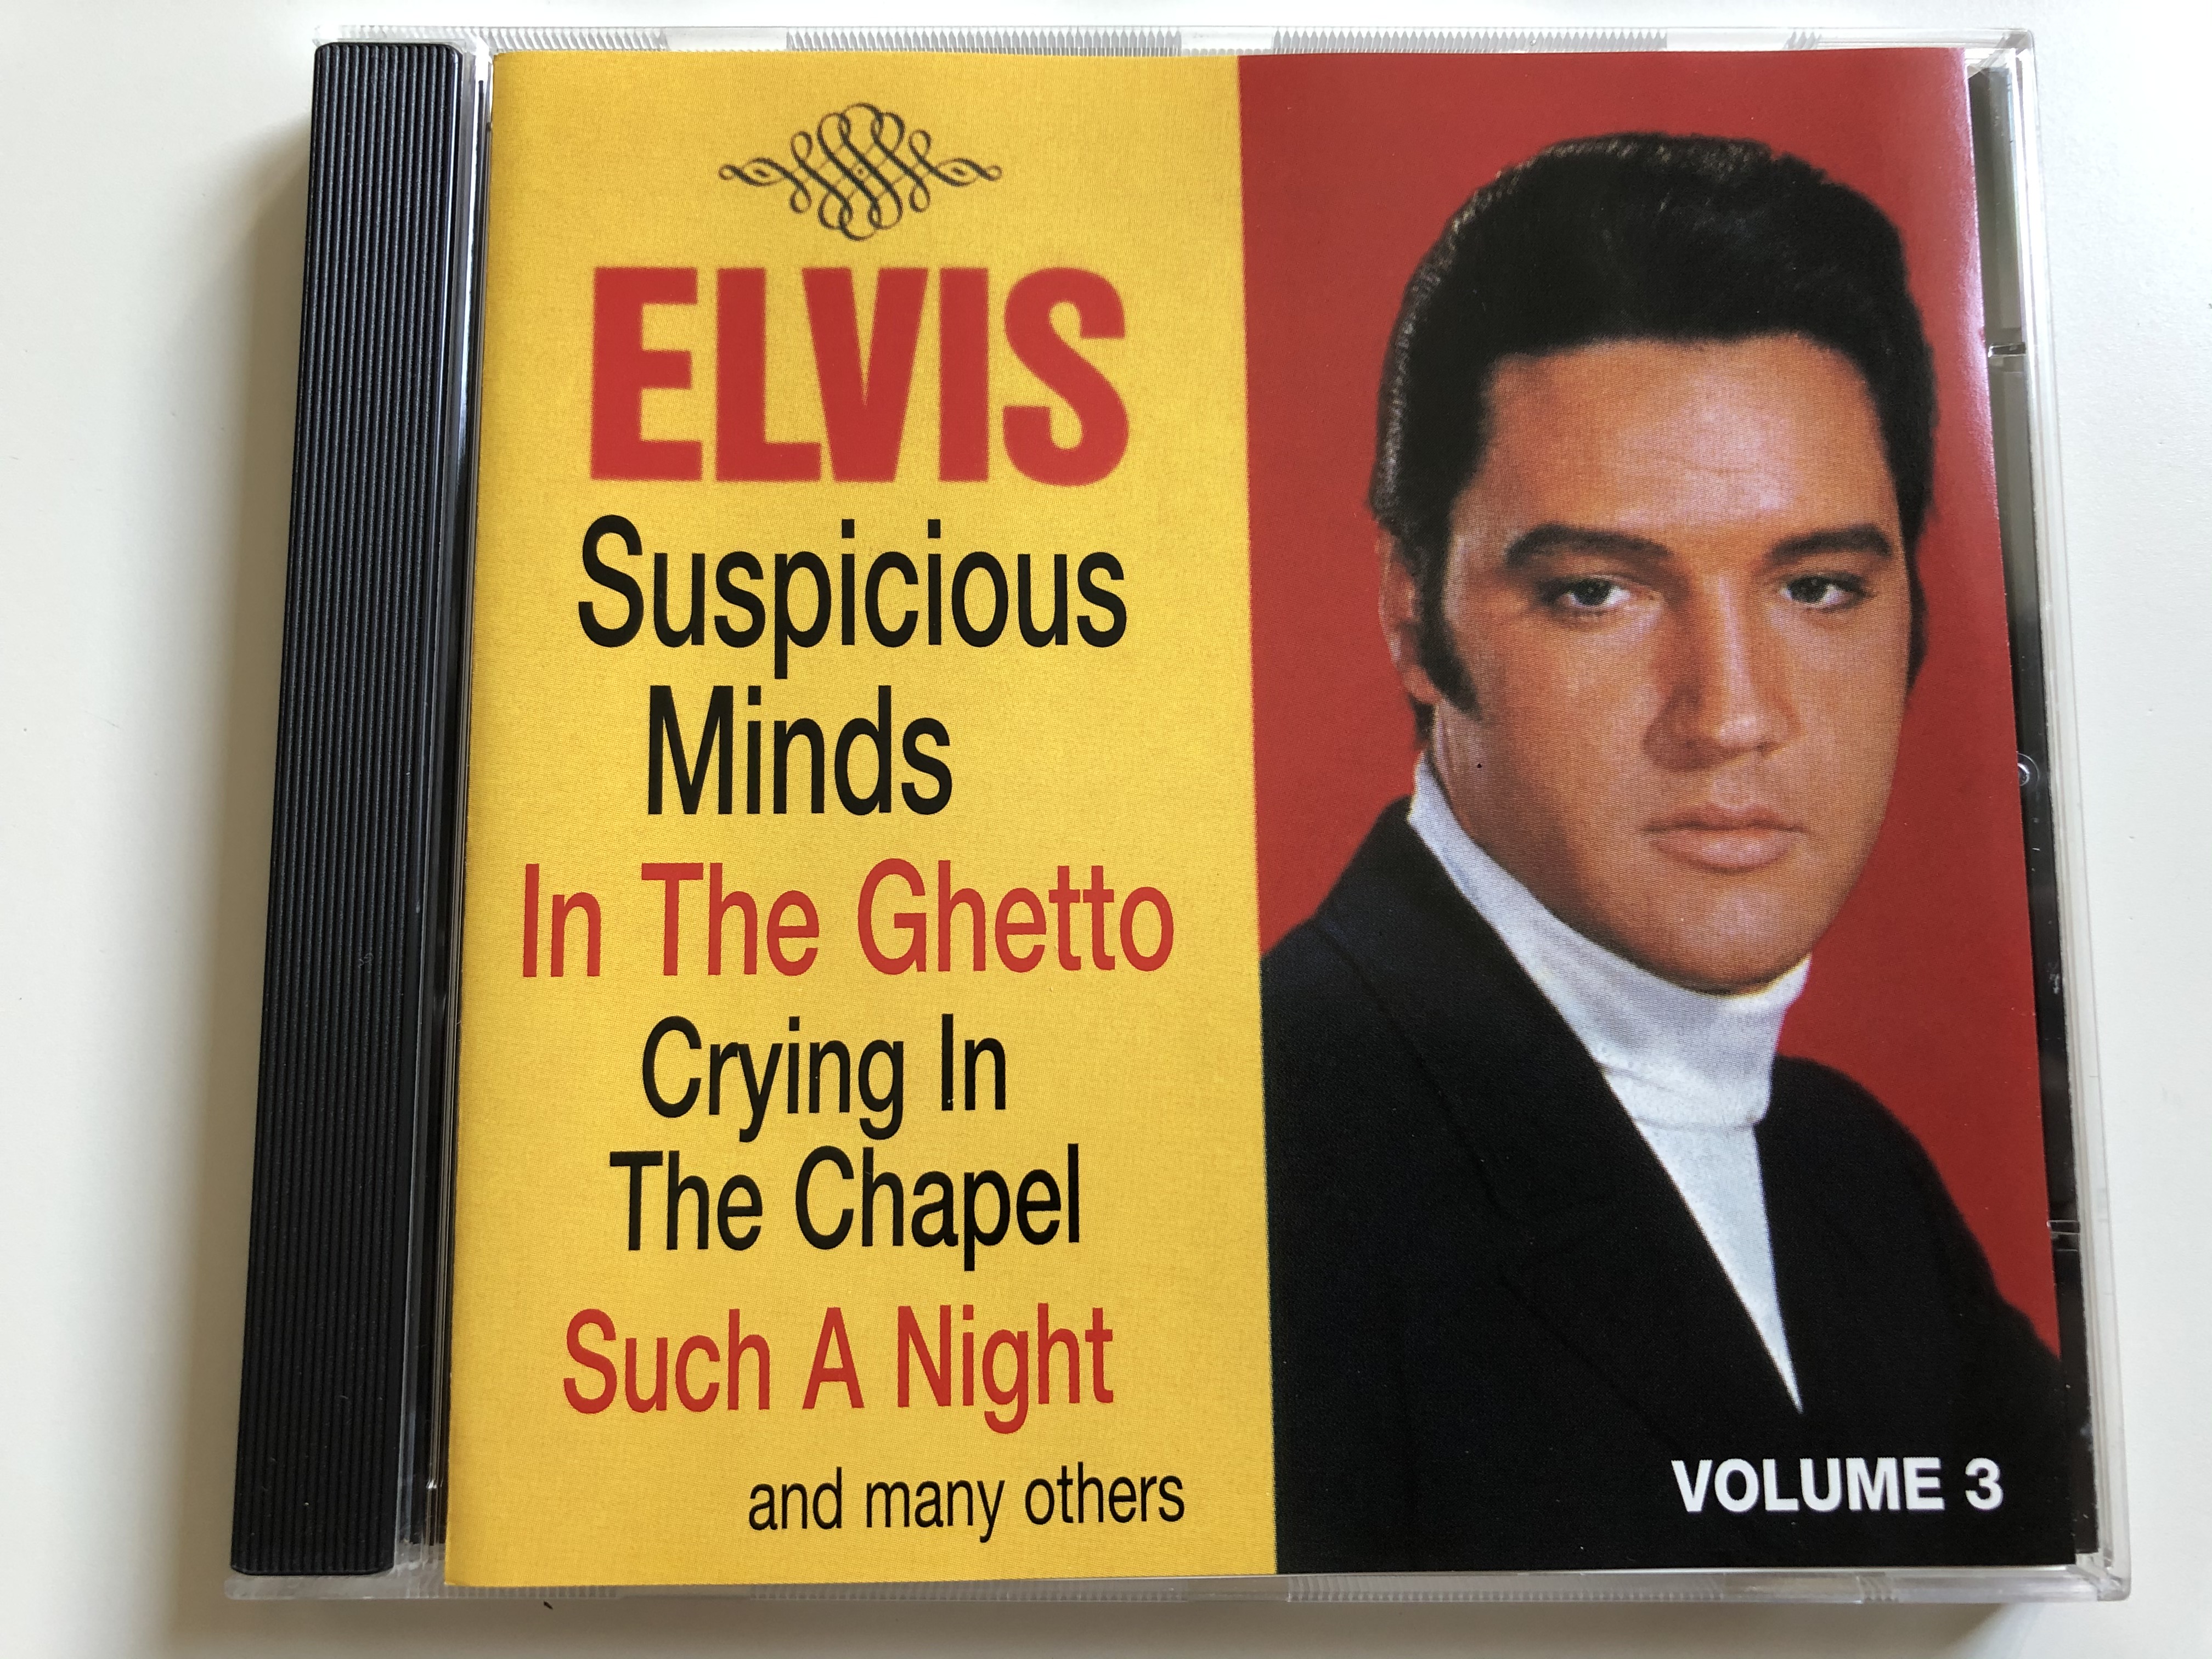 elvis-the-100-top-hits-collection-rca-5x-audio-cd-box-set-1997-stereo-36-428-1-13-.jpg